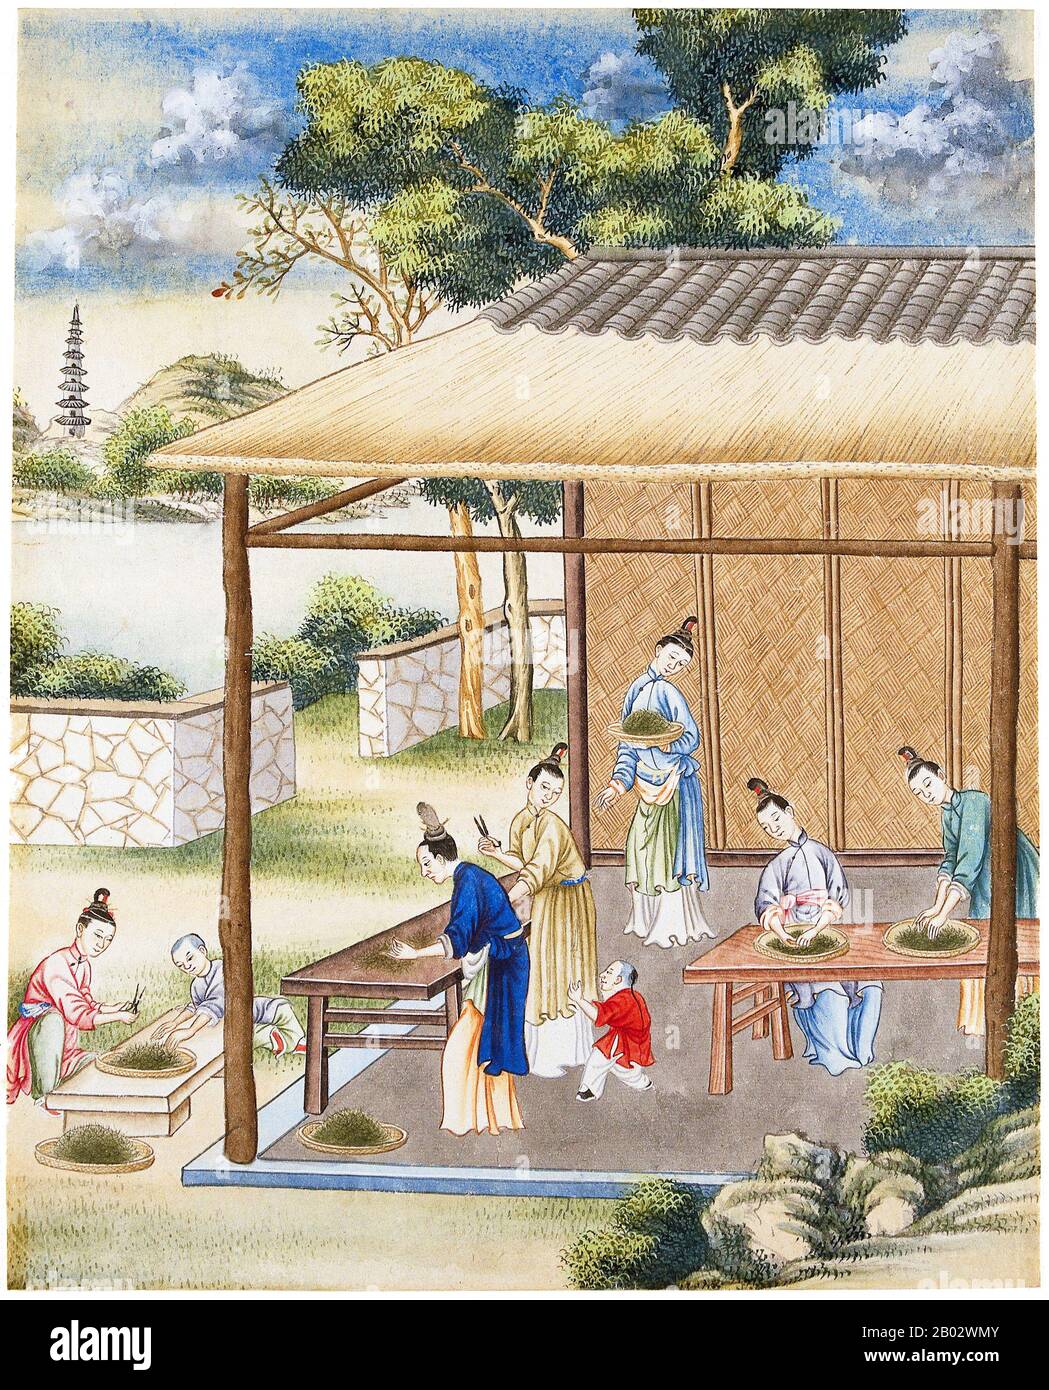 According to oral tradition, tea has been grown in China for more than four millennia. The earliest written accounts of tea making, however, date from around 350 CE, when it first became a drink at the imperial court.  Around 800 CE tea seeds were taken to Japan, where regular cultivation was soon established. Just over five centuries later, in 1517, tea was first shipped to Europe by the Portuguese soon after they began their trade with China. In 1667 the Honourable East India Company ordered the first British shipment of tea from China, requesting of their agents ‘one hundred pounds weight o Stock Photo